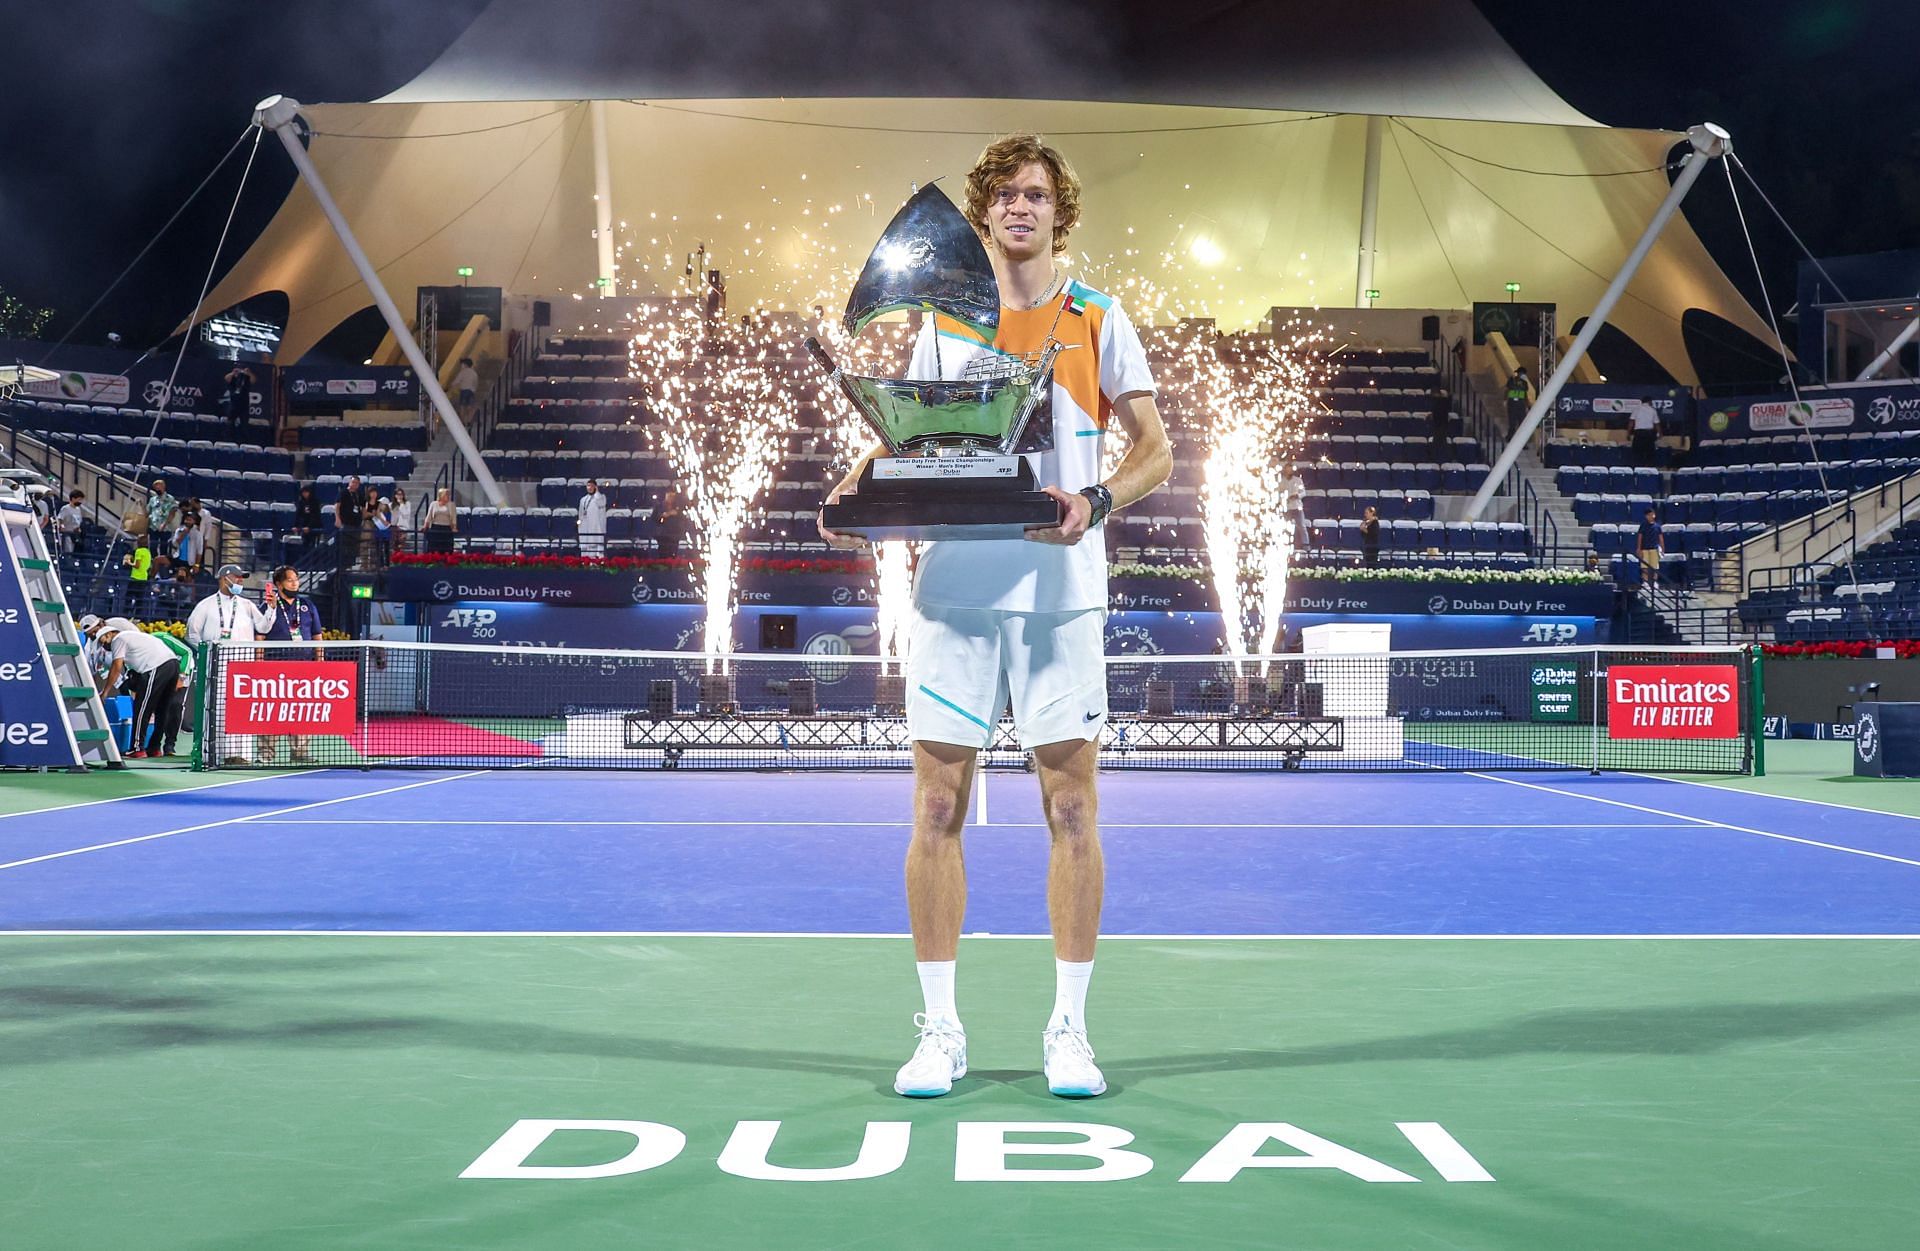 Andrey Rublev at the 2022 Dubai Open